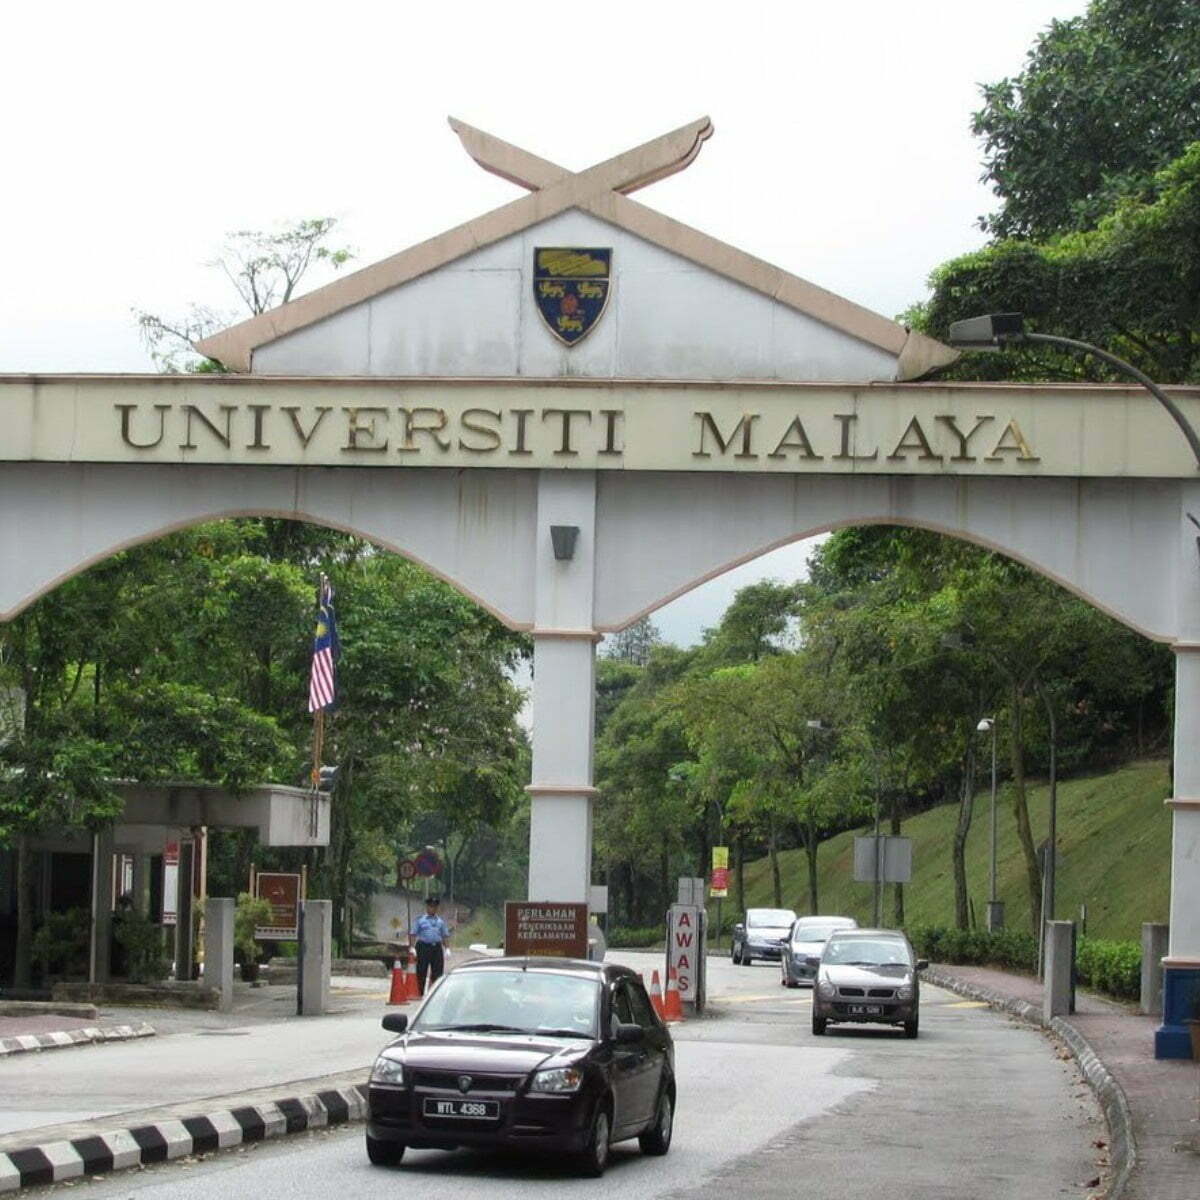 Student Financial Aid Scheme at the University of Malaya